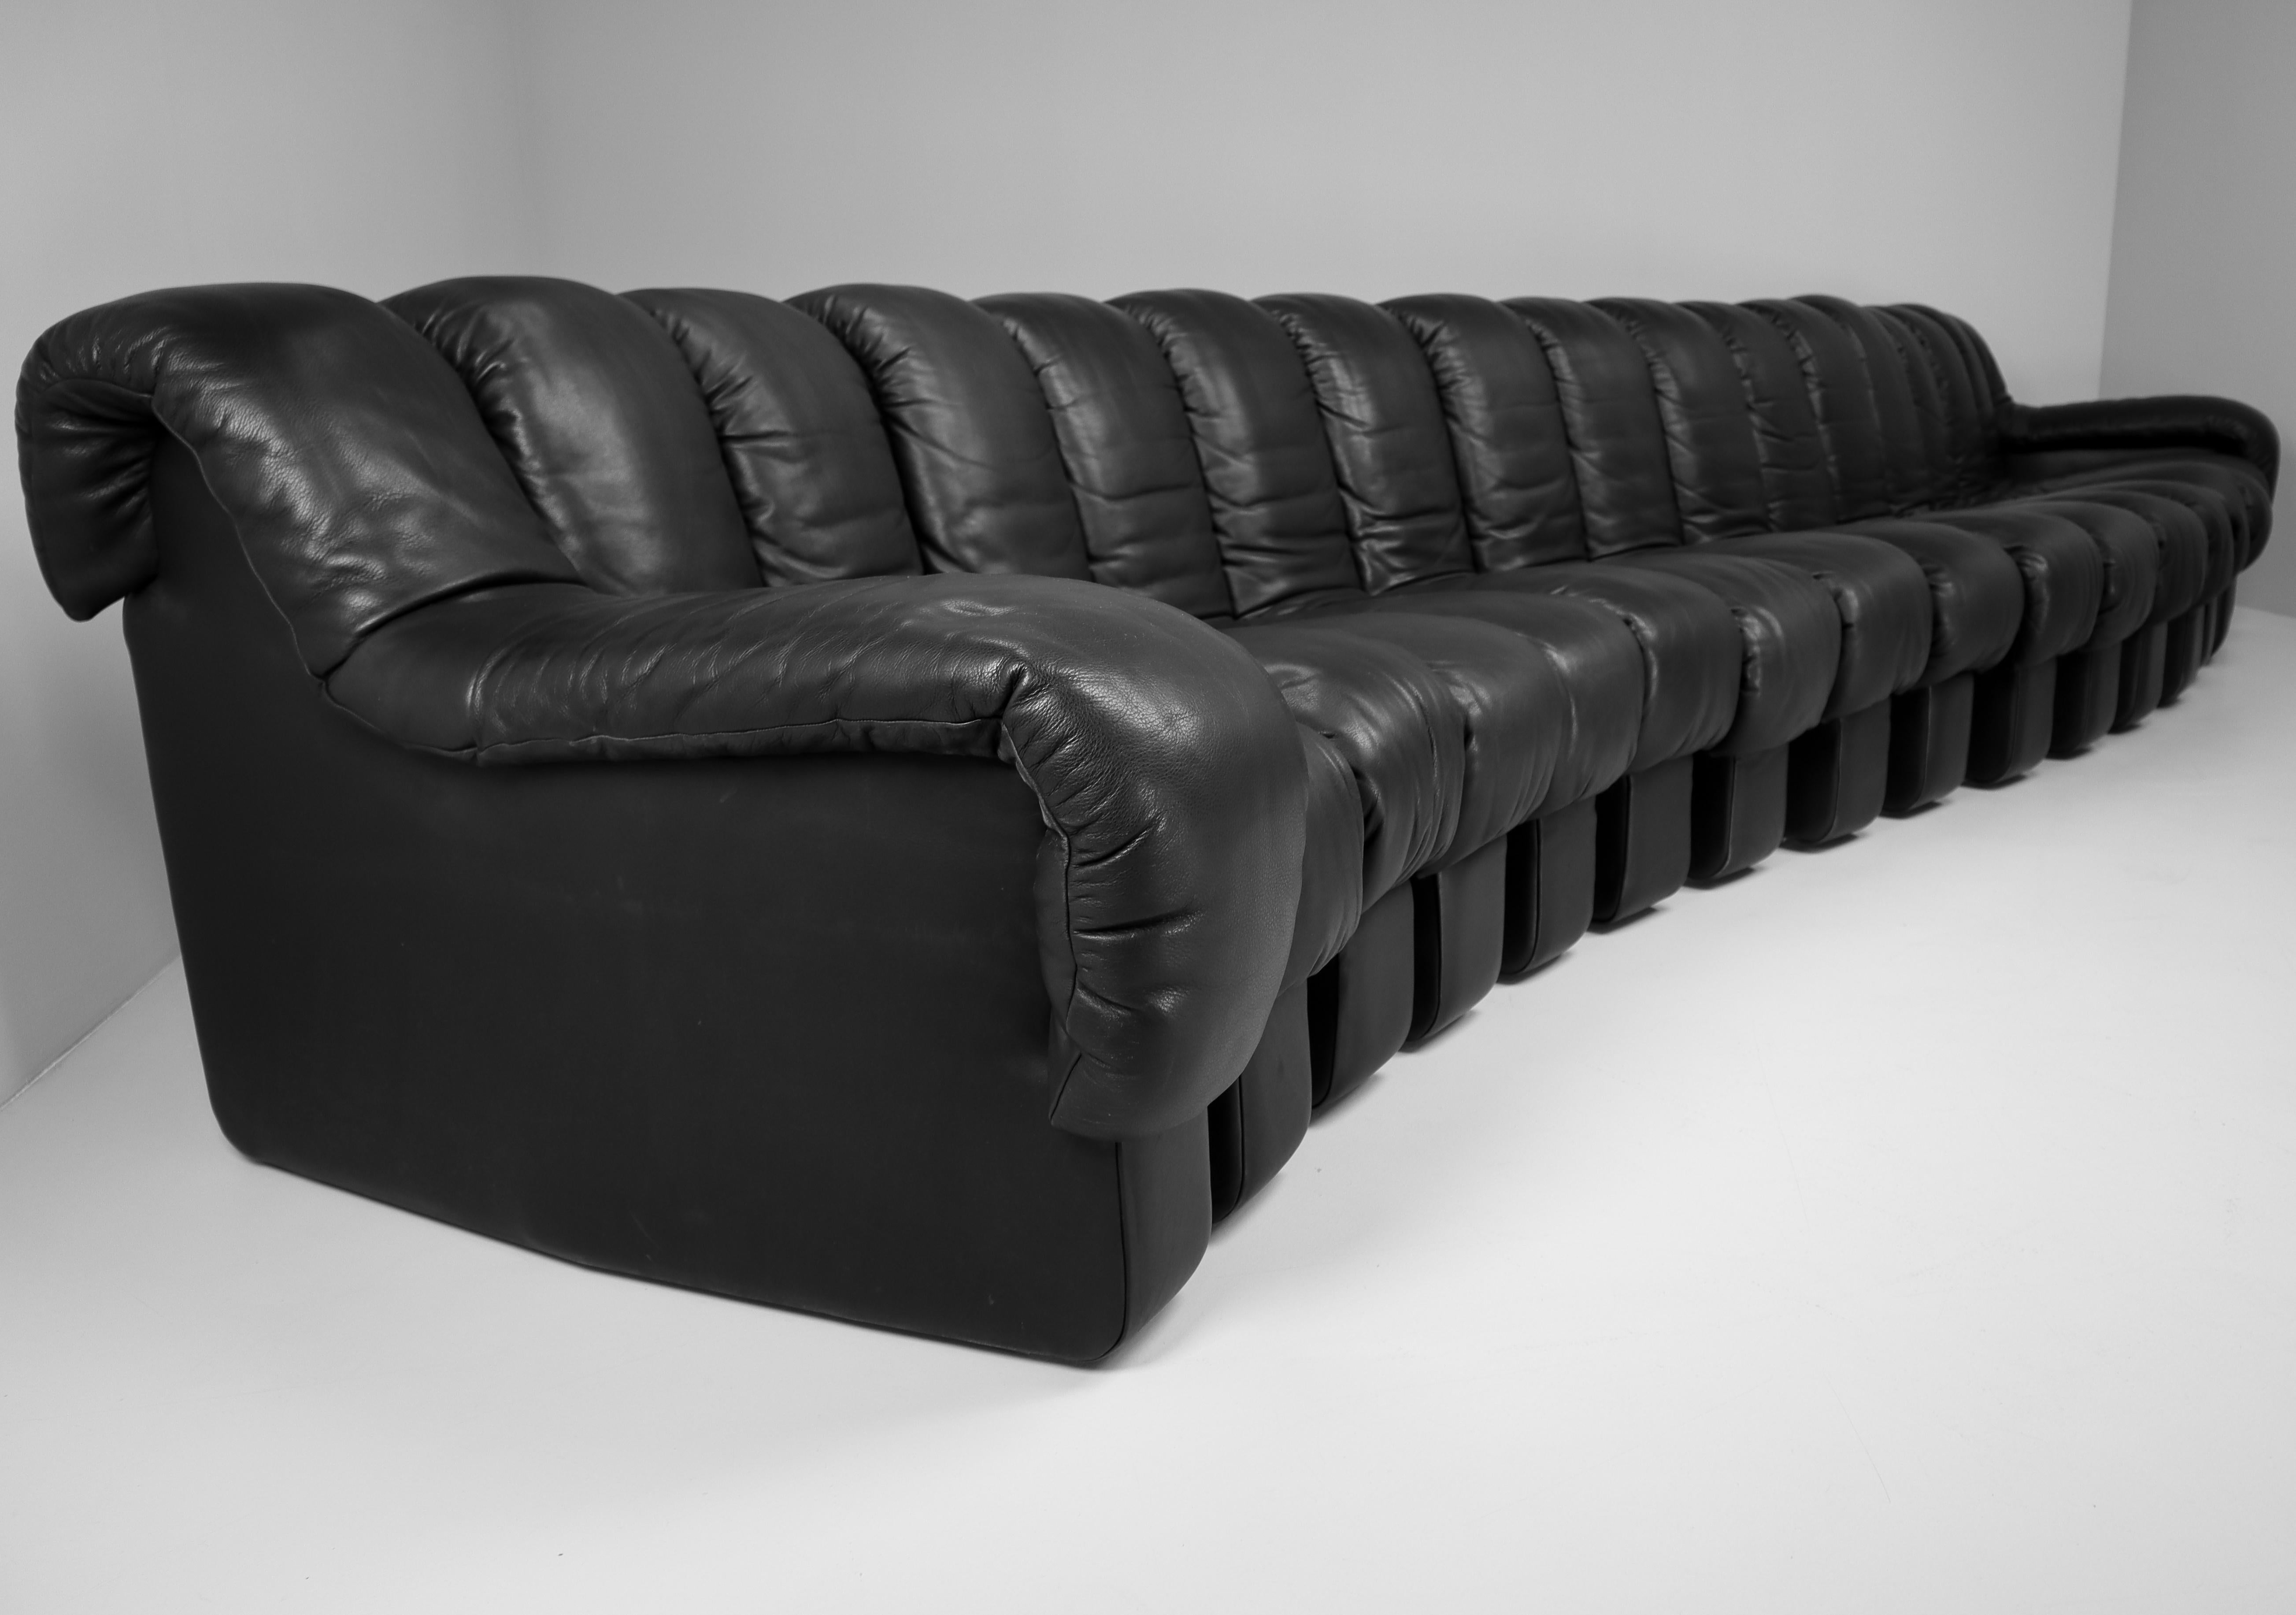 Late 20th Century De Sede DS 600 Snake Sofas in Full Black Leather by Ueli Berger Switzerland 1972